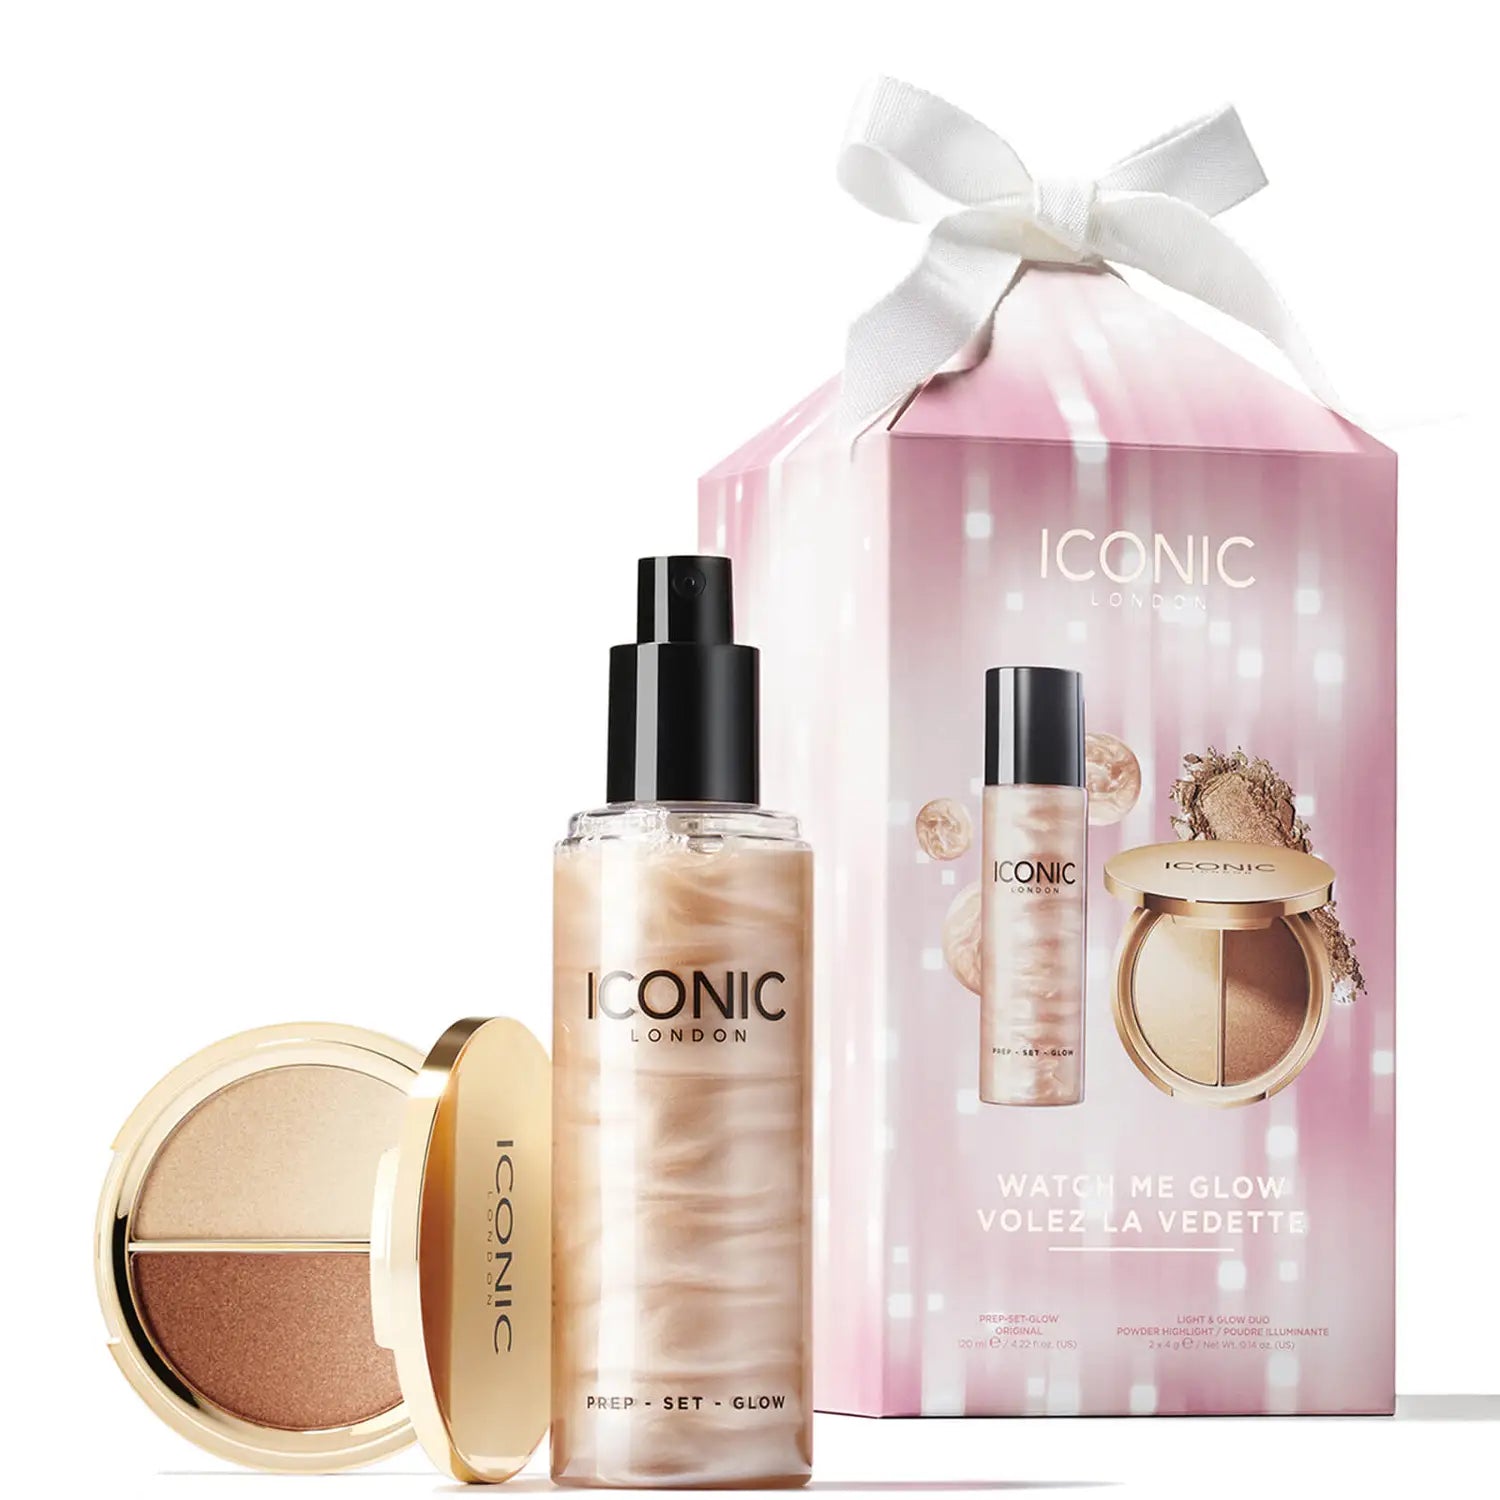 ICONIC London Watch Me Glow Set, products and packaging